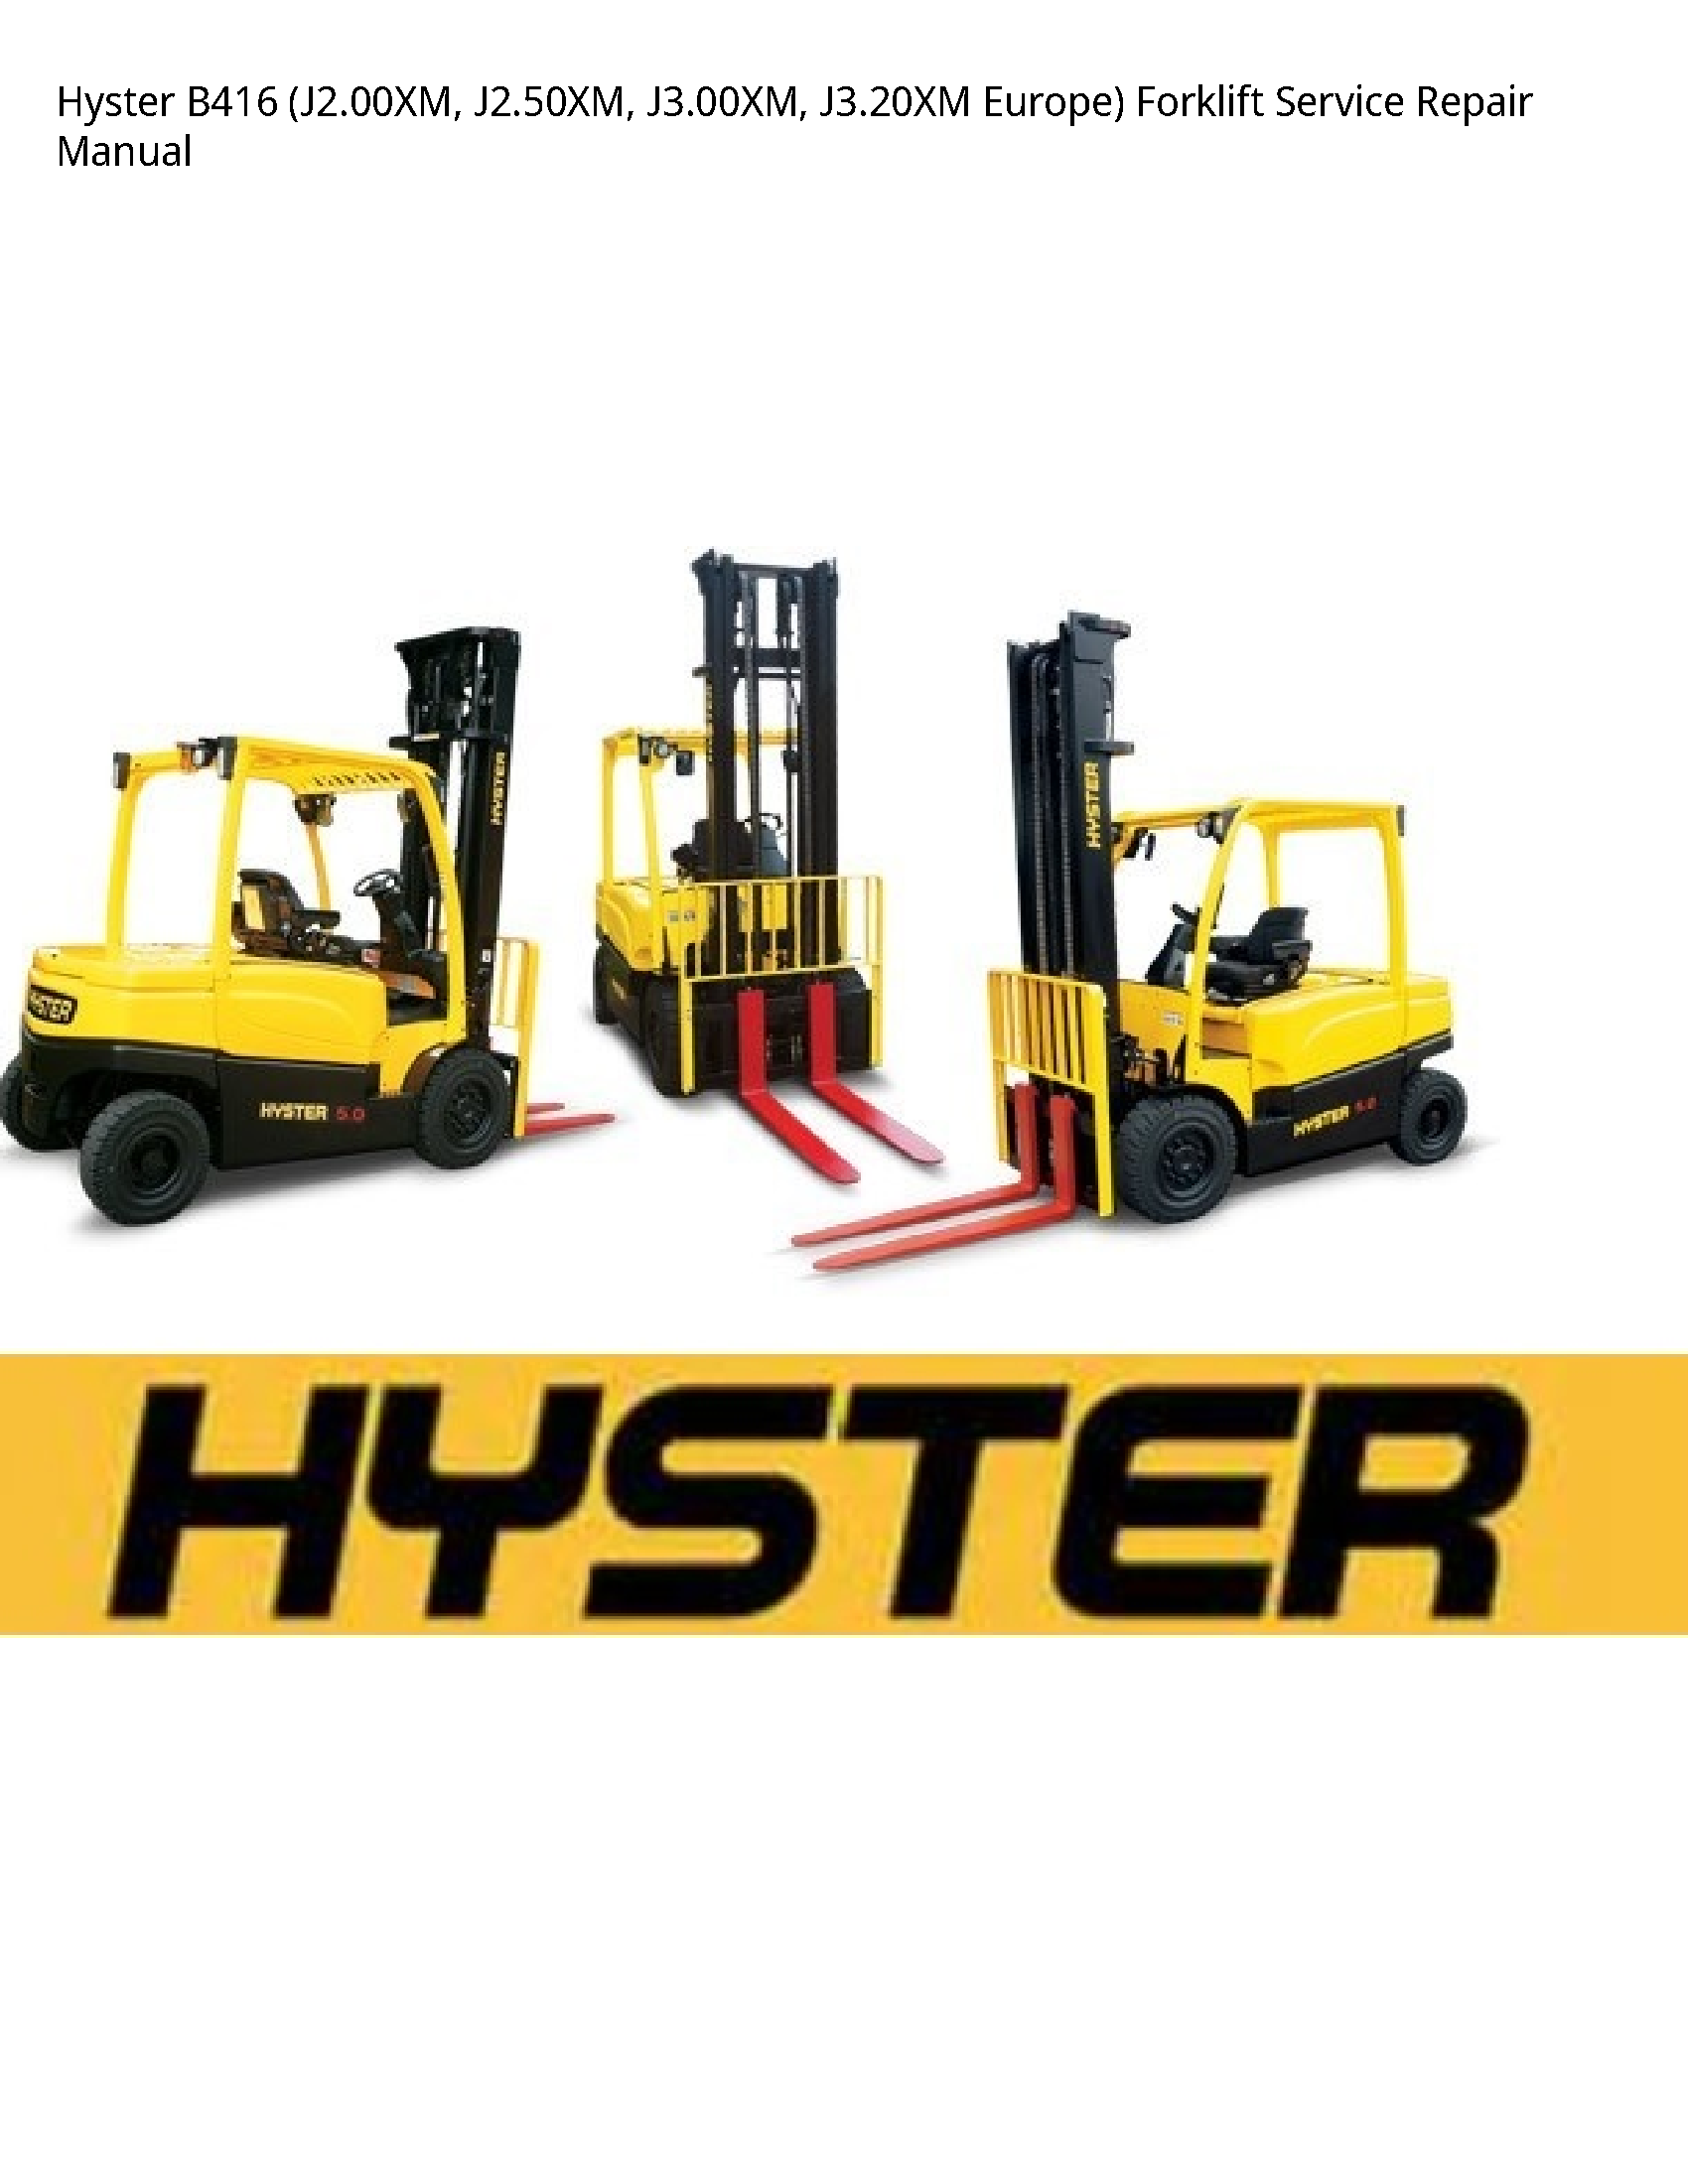 Hyster B416 Europe) Forklift manual